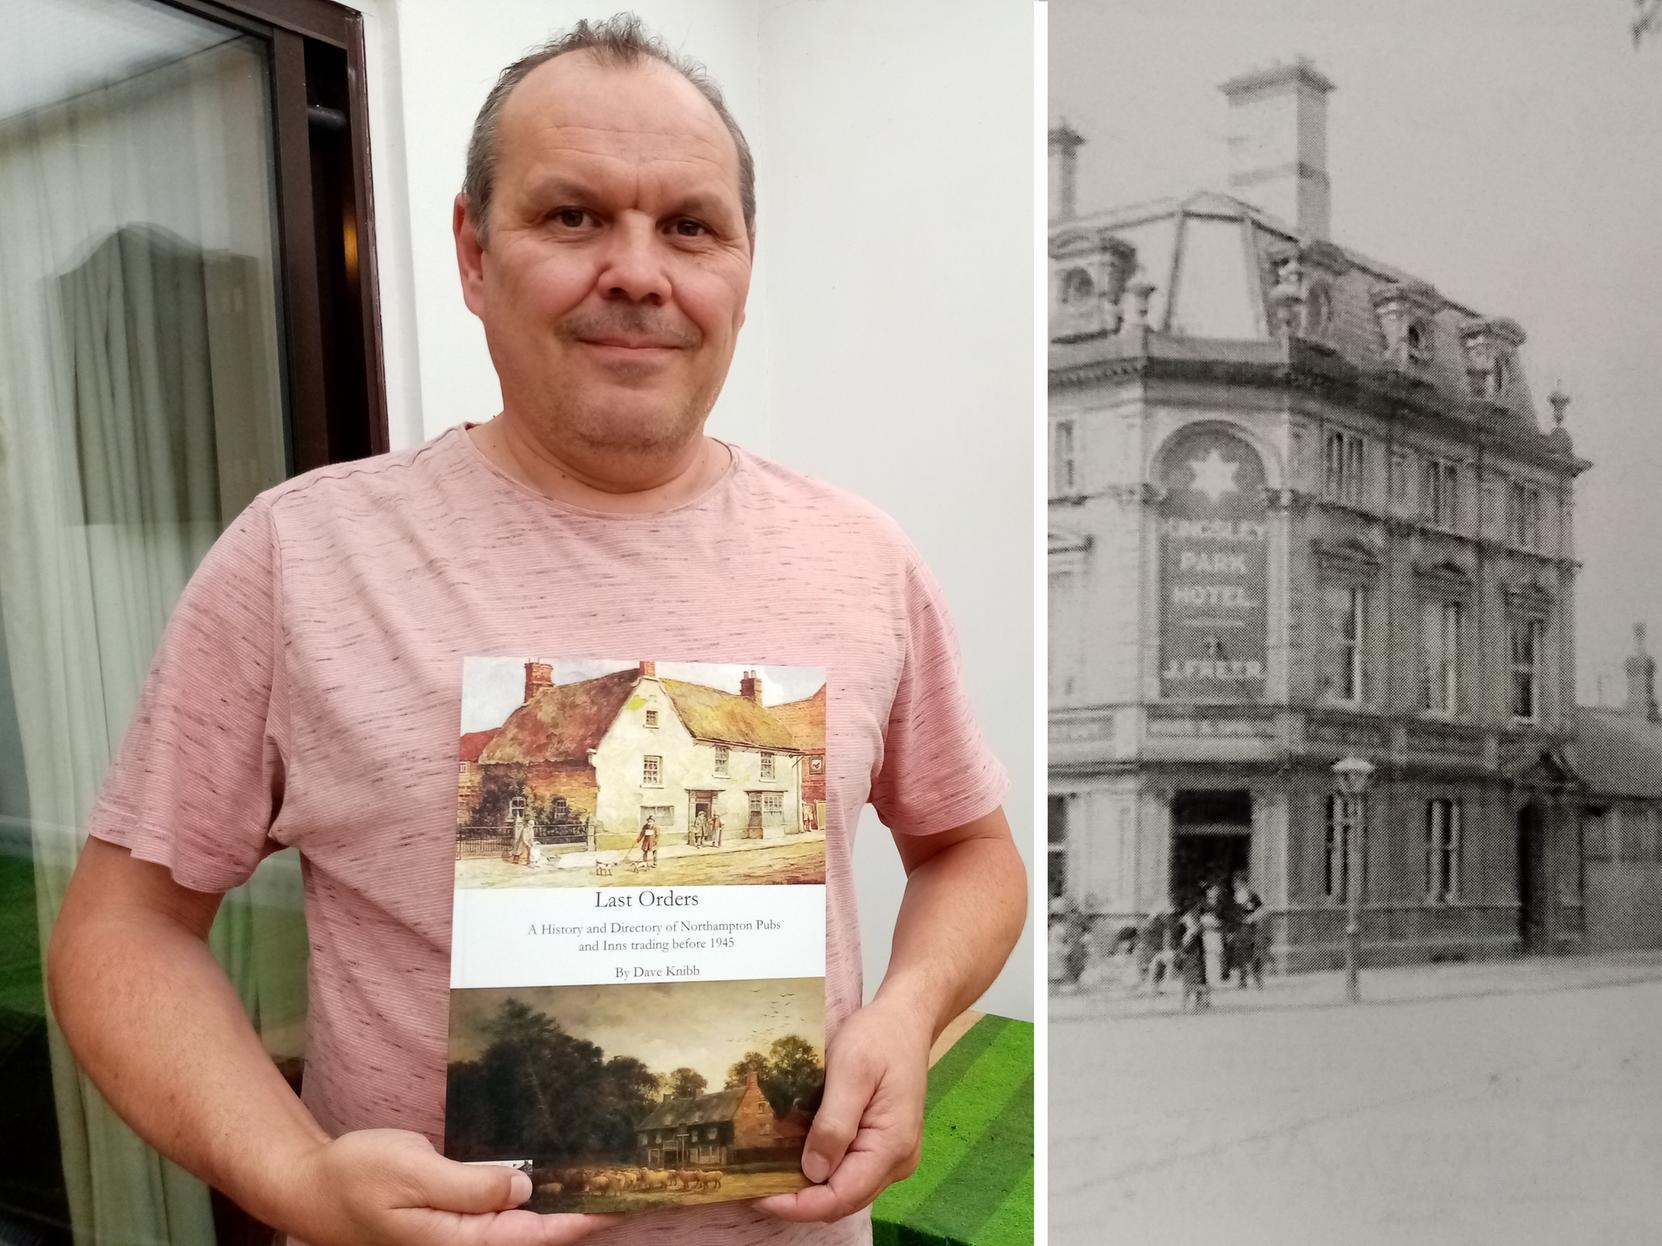 If you've enjoyed this collection of old Northampton pubs, check out Dave Knibb's 'Last Orders' - available for order on 07939 990790 or Emmaadamknibb@hotmail.com.